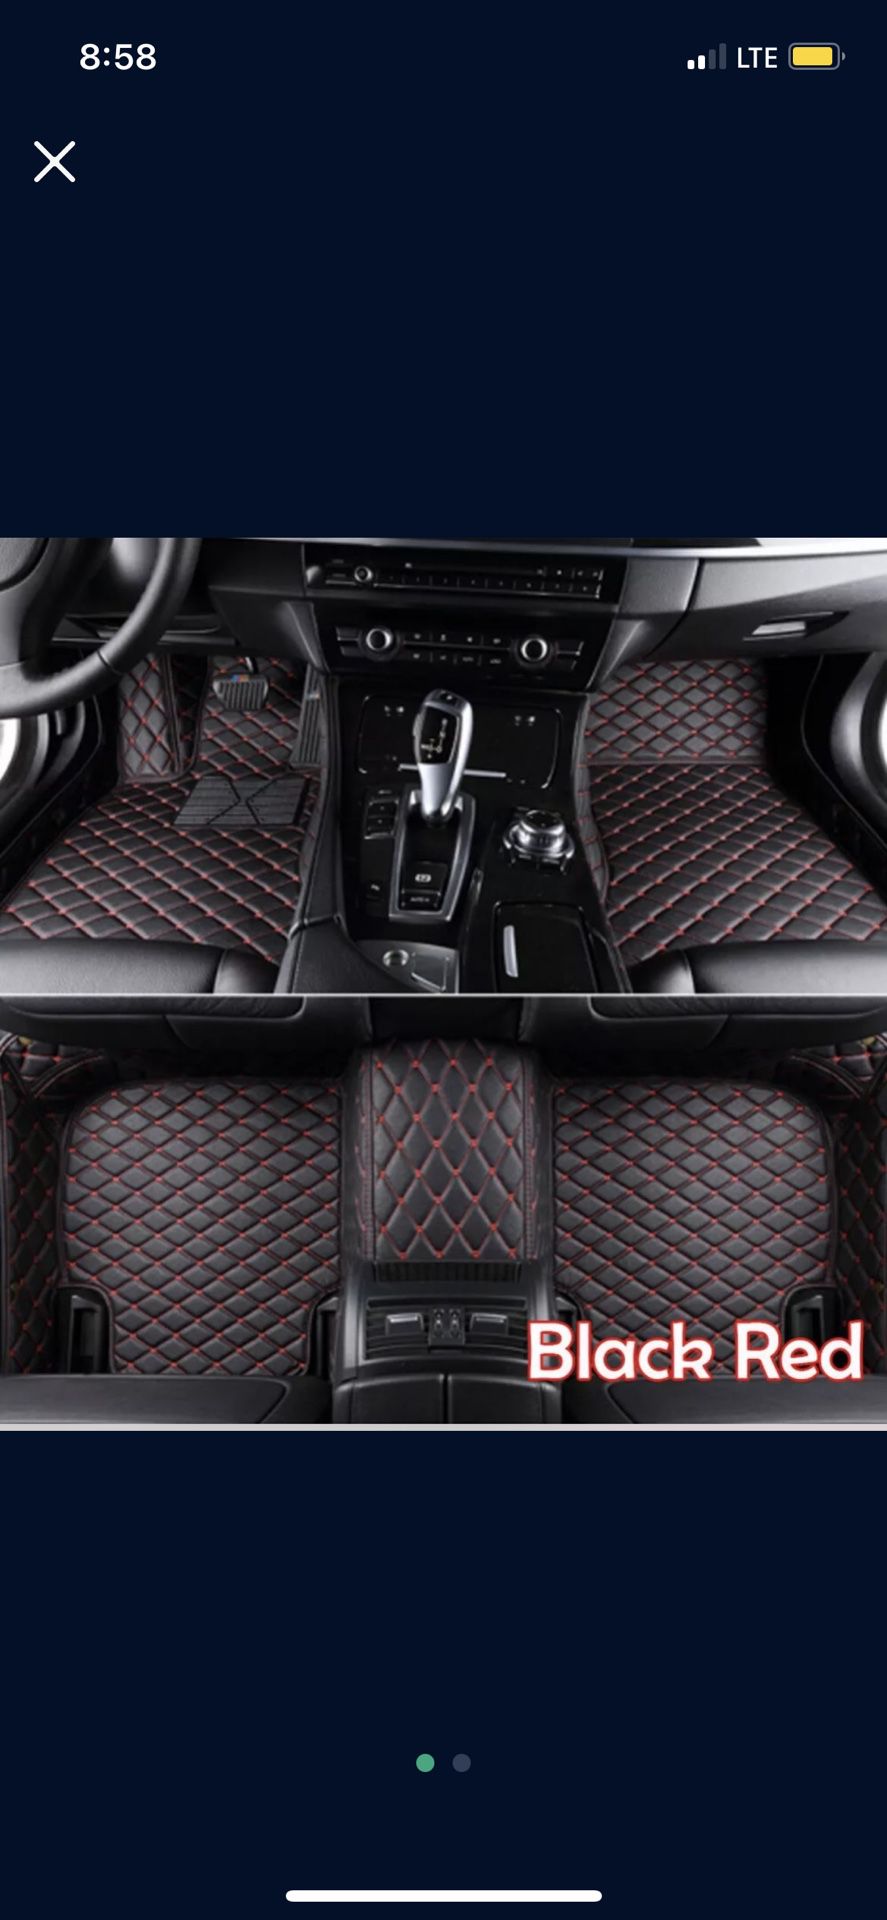 Black and red car floor mats 